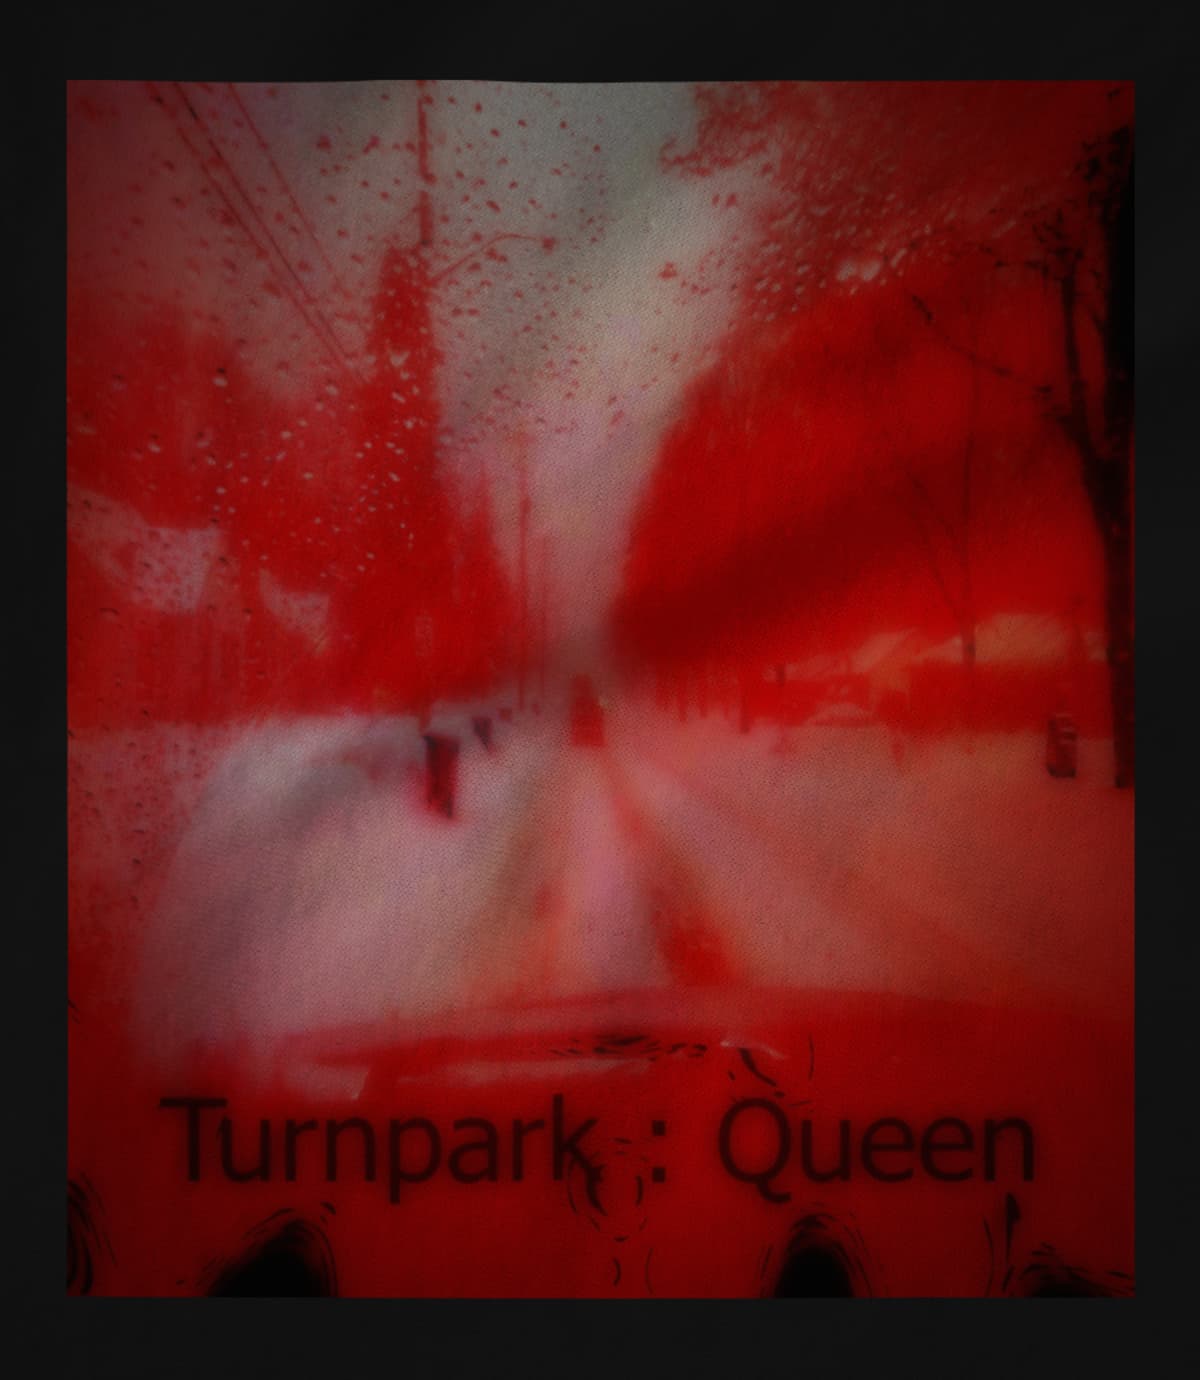 Turnpark